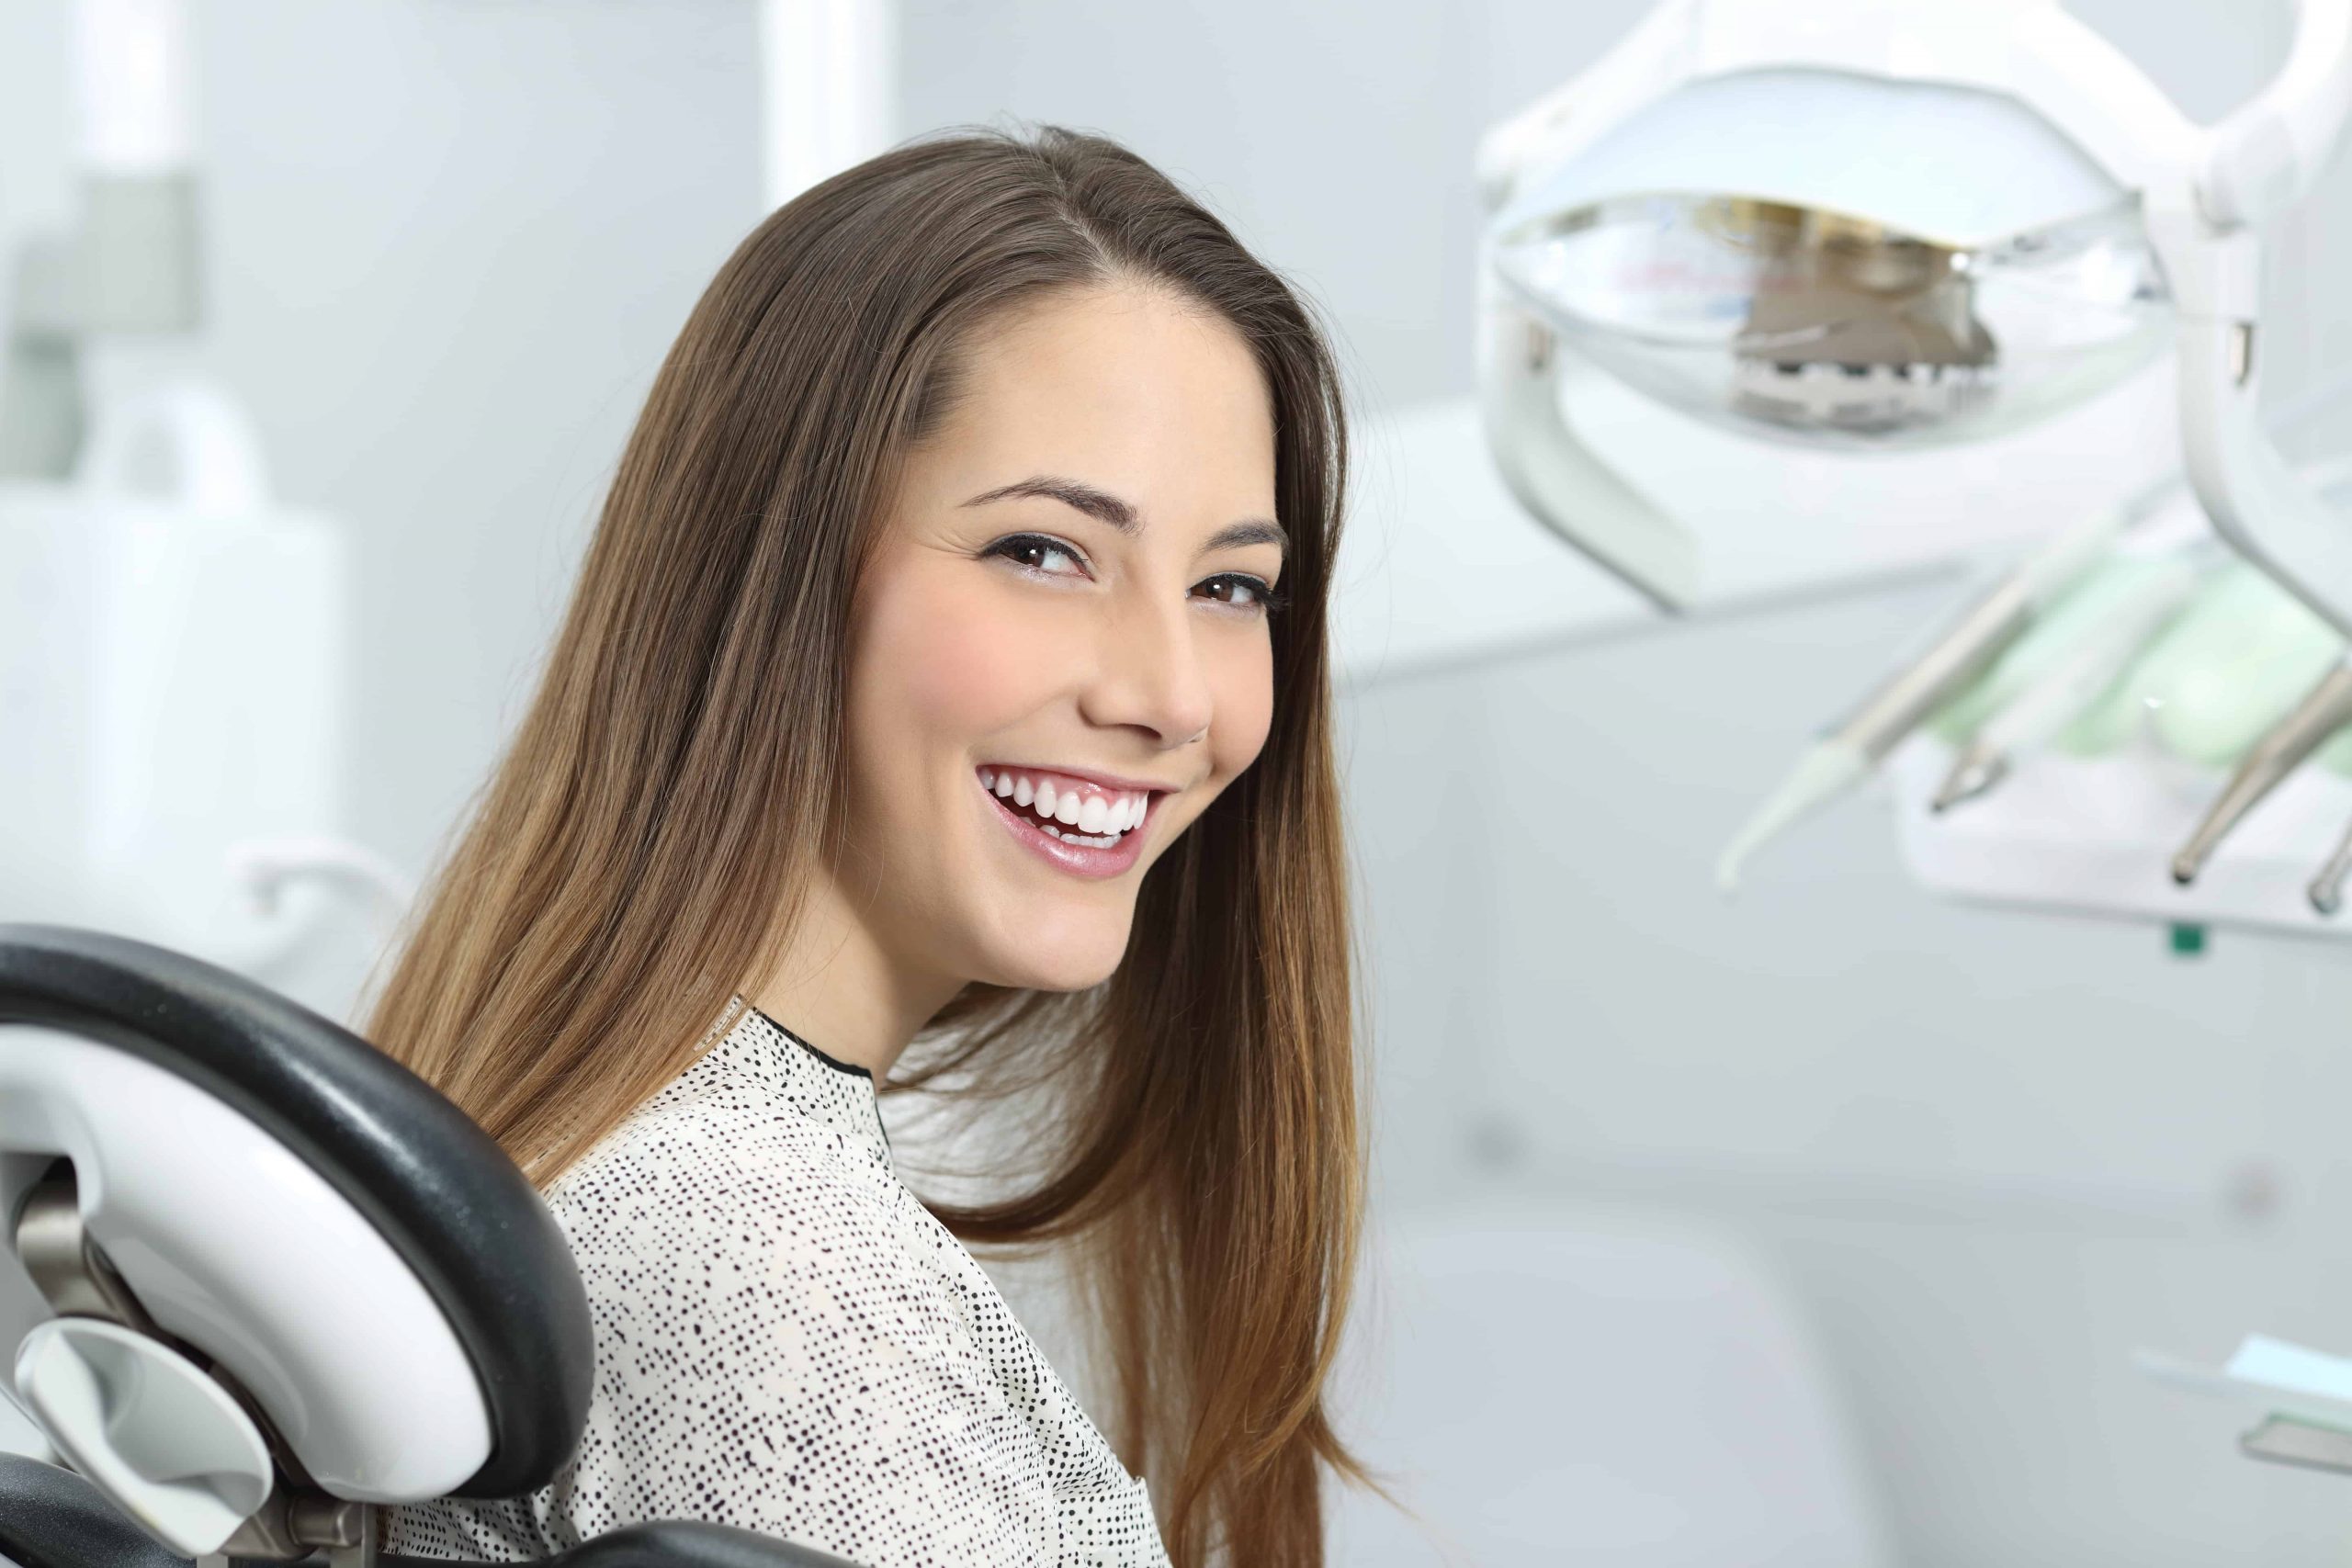 Ten Reasons You Should See Your Hygienist Regularly